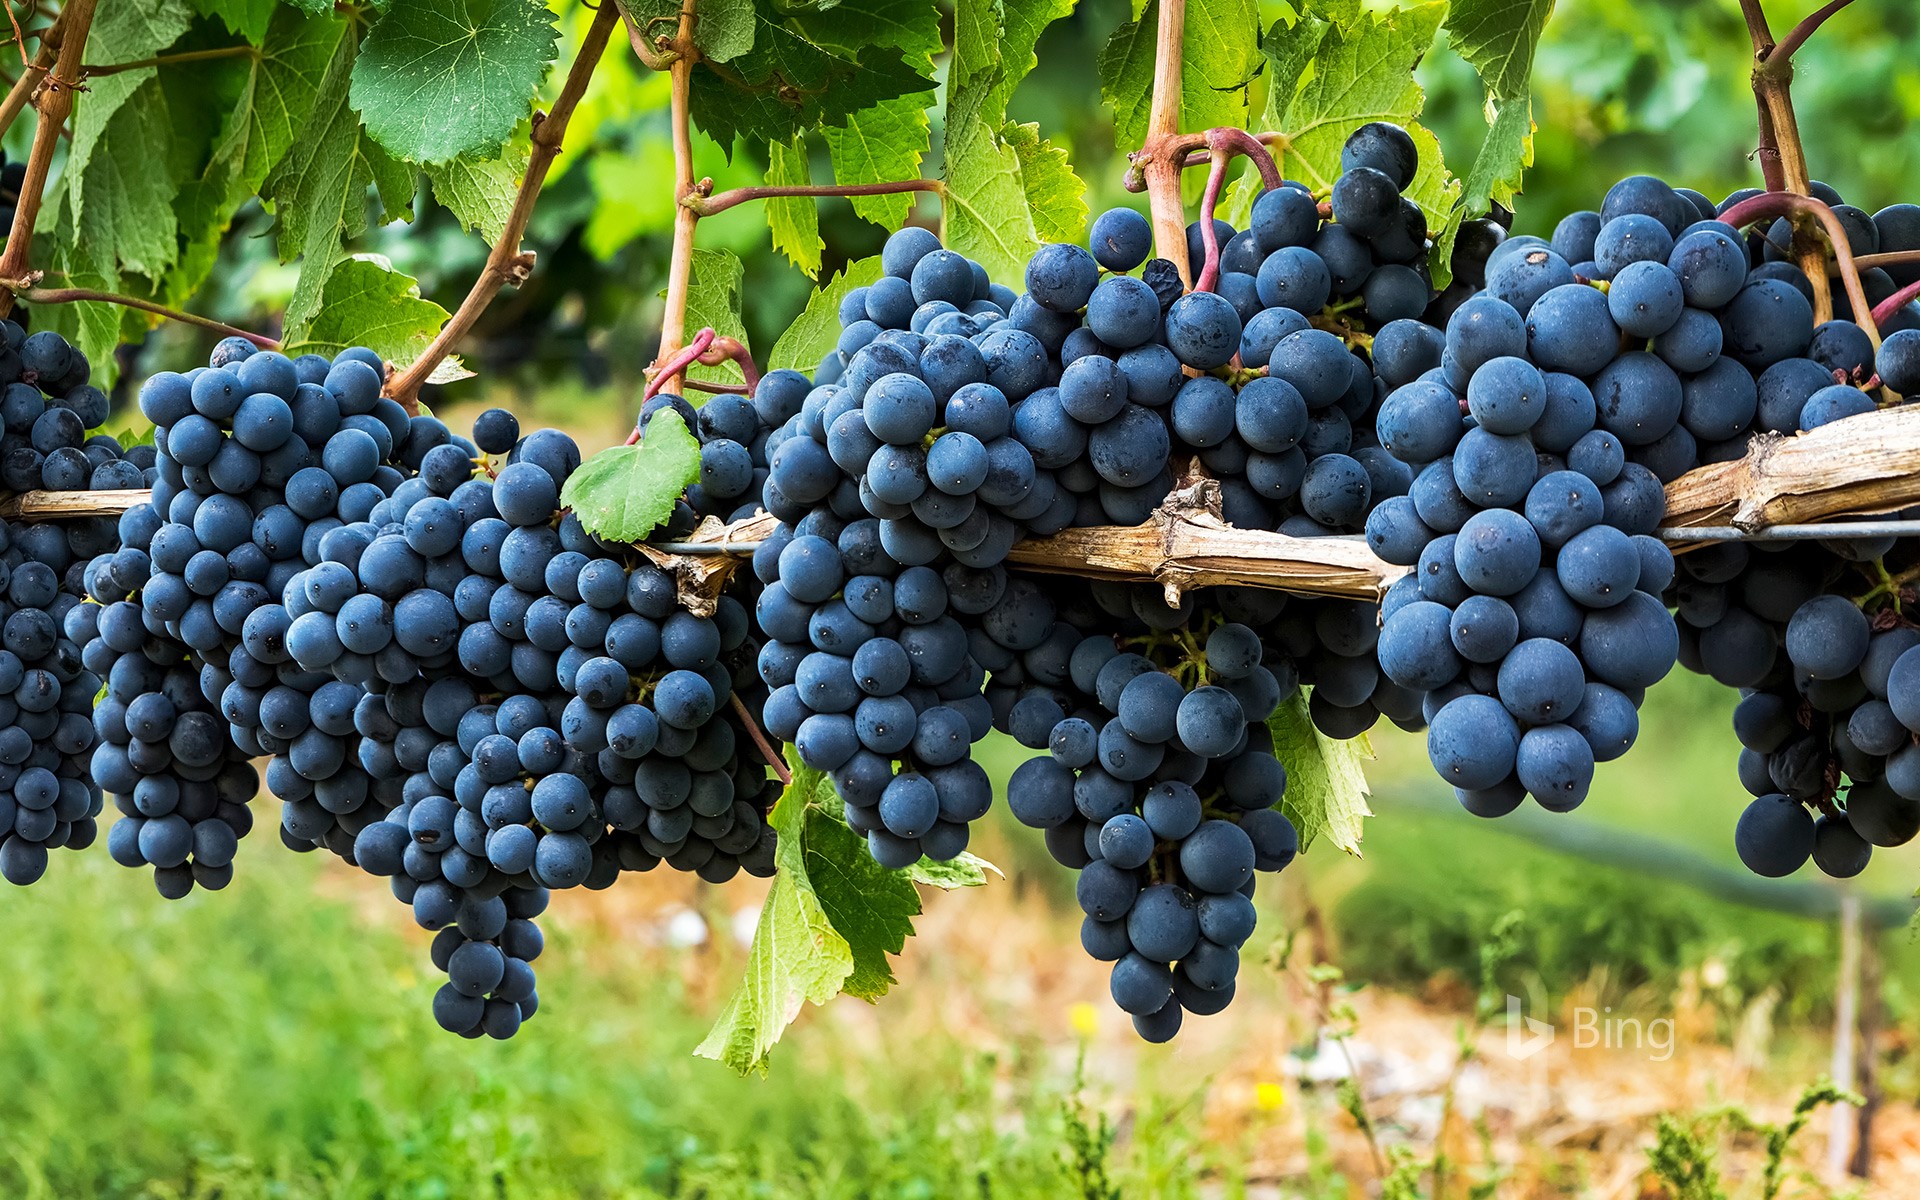 Clusters of dark purple grapes hanging on a vine in Penticton, B.C.